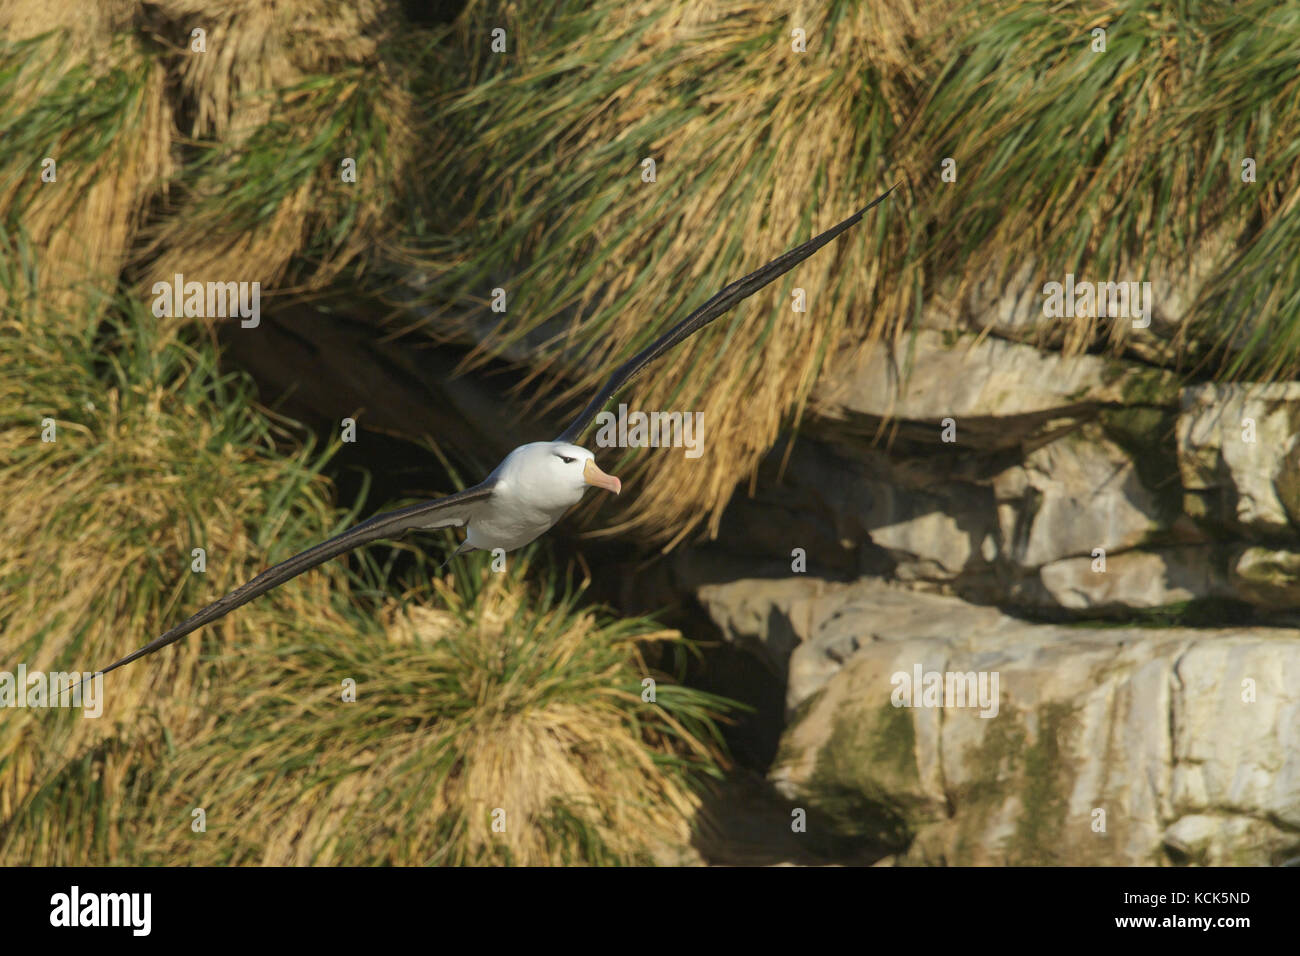 Black-browed Albatross (Thalassarche melanophris) at a nesting colony in the Falkland Islands. Stock Photo